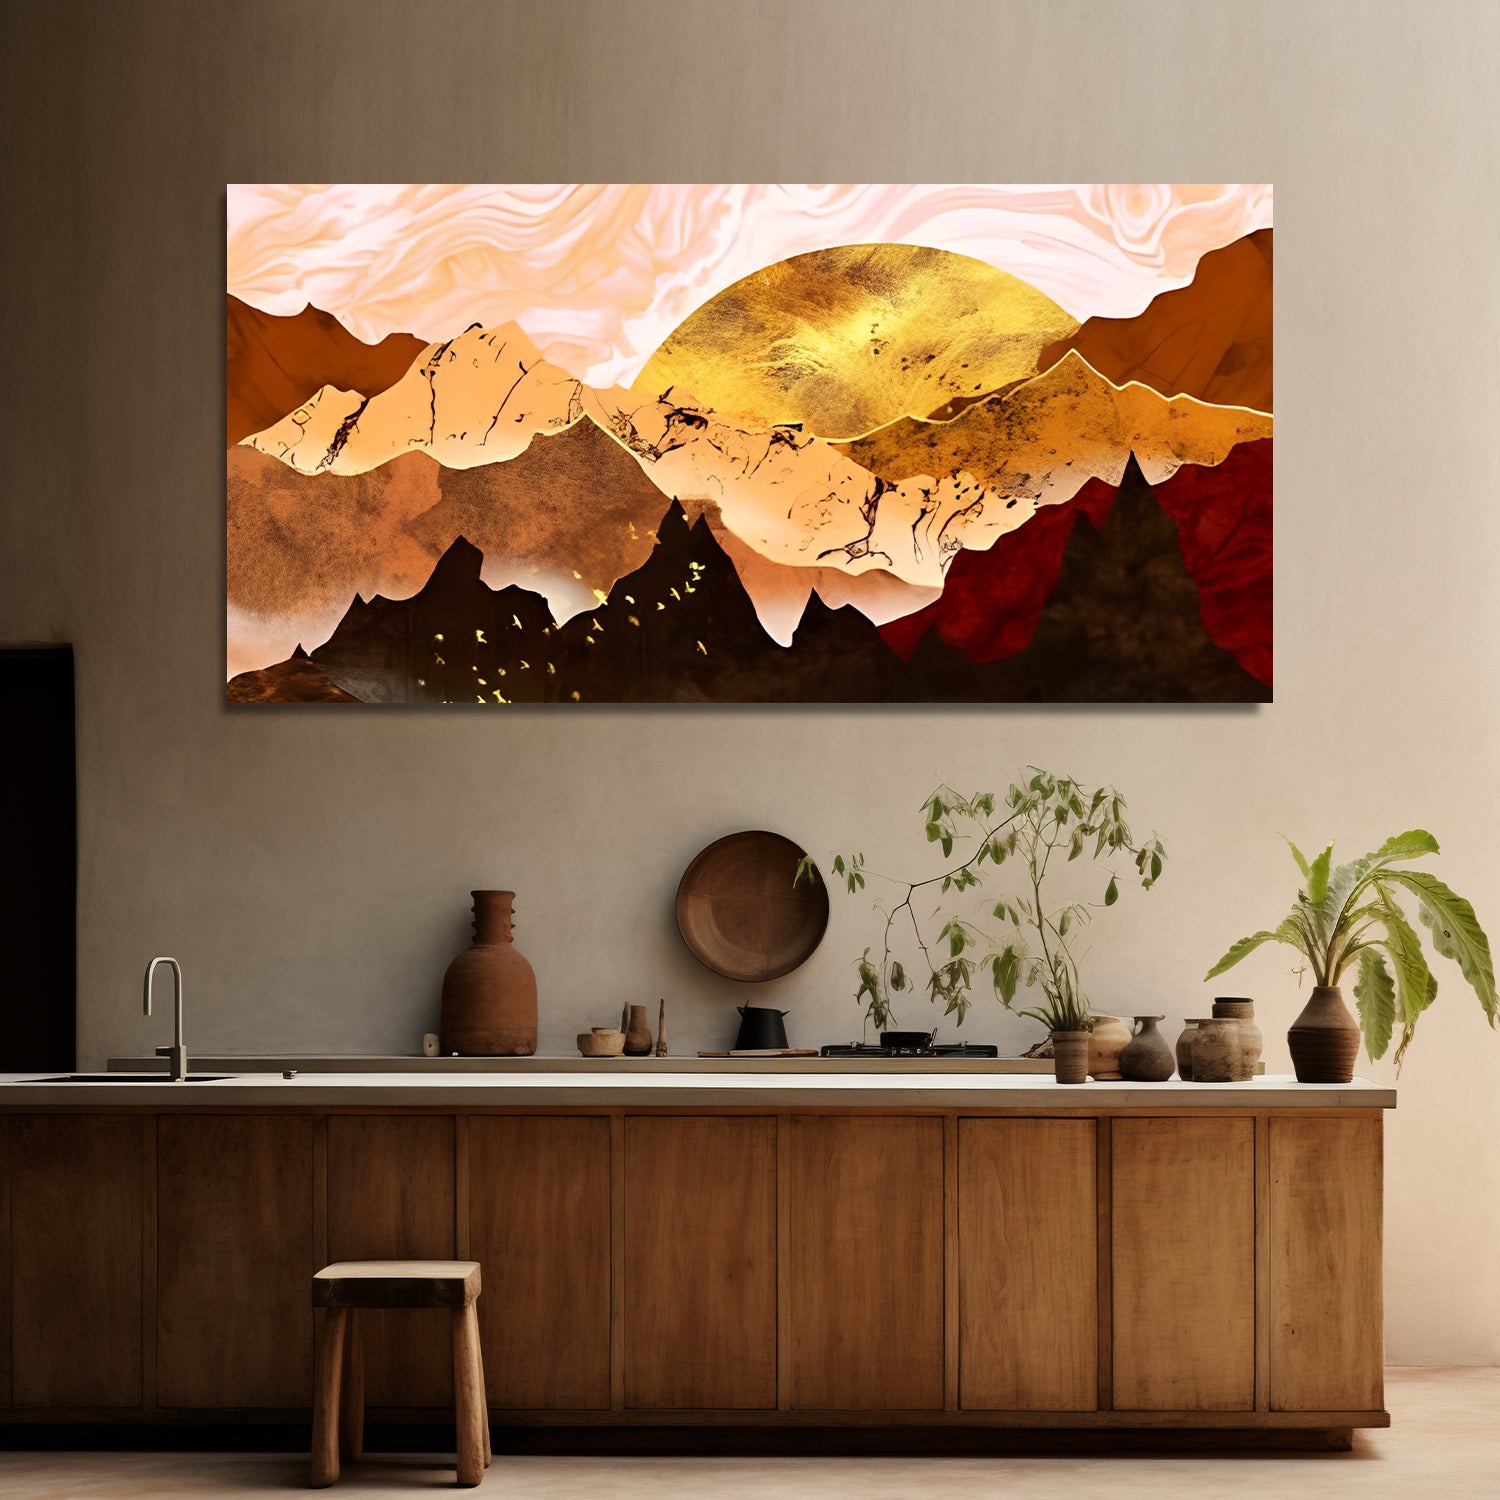 Golden mountain Canvas wall painting-